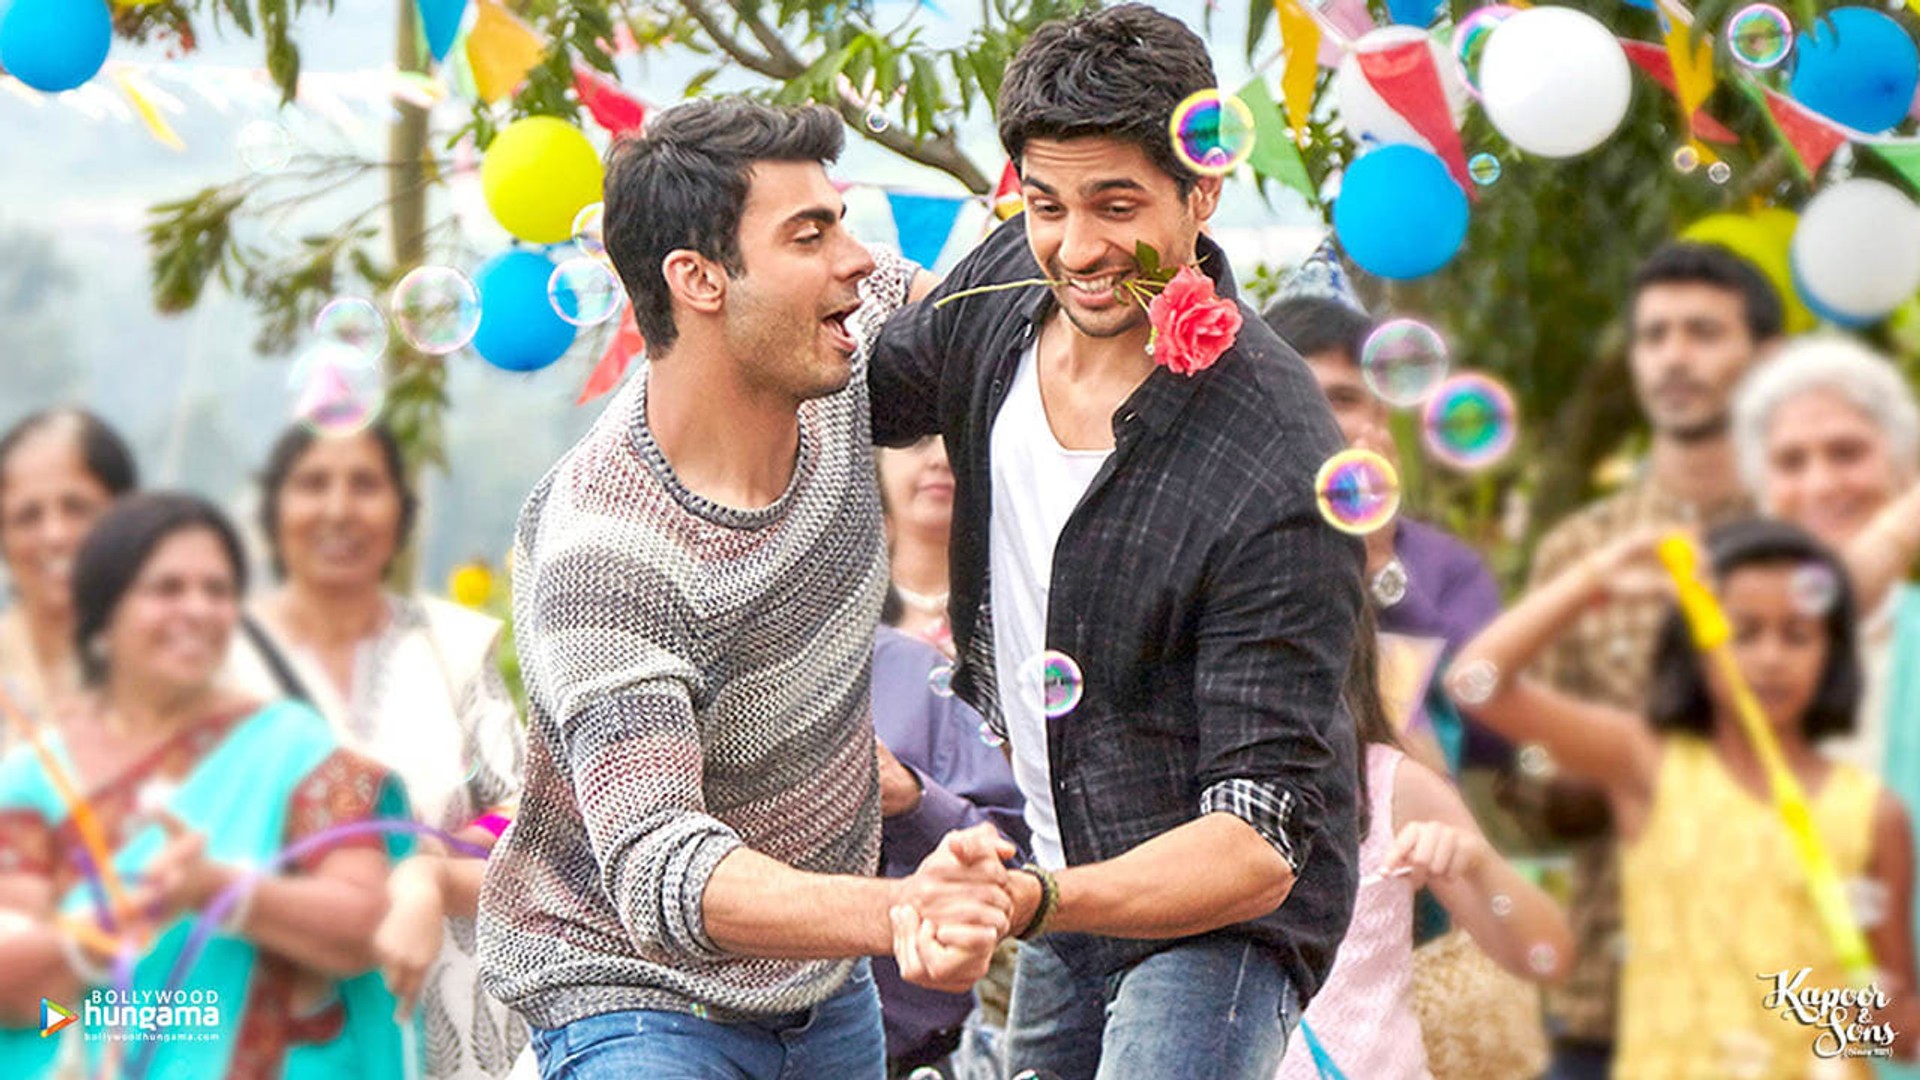 Kapoor & Sons background